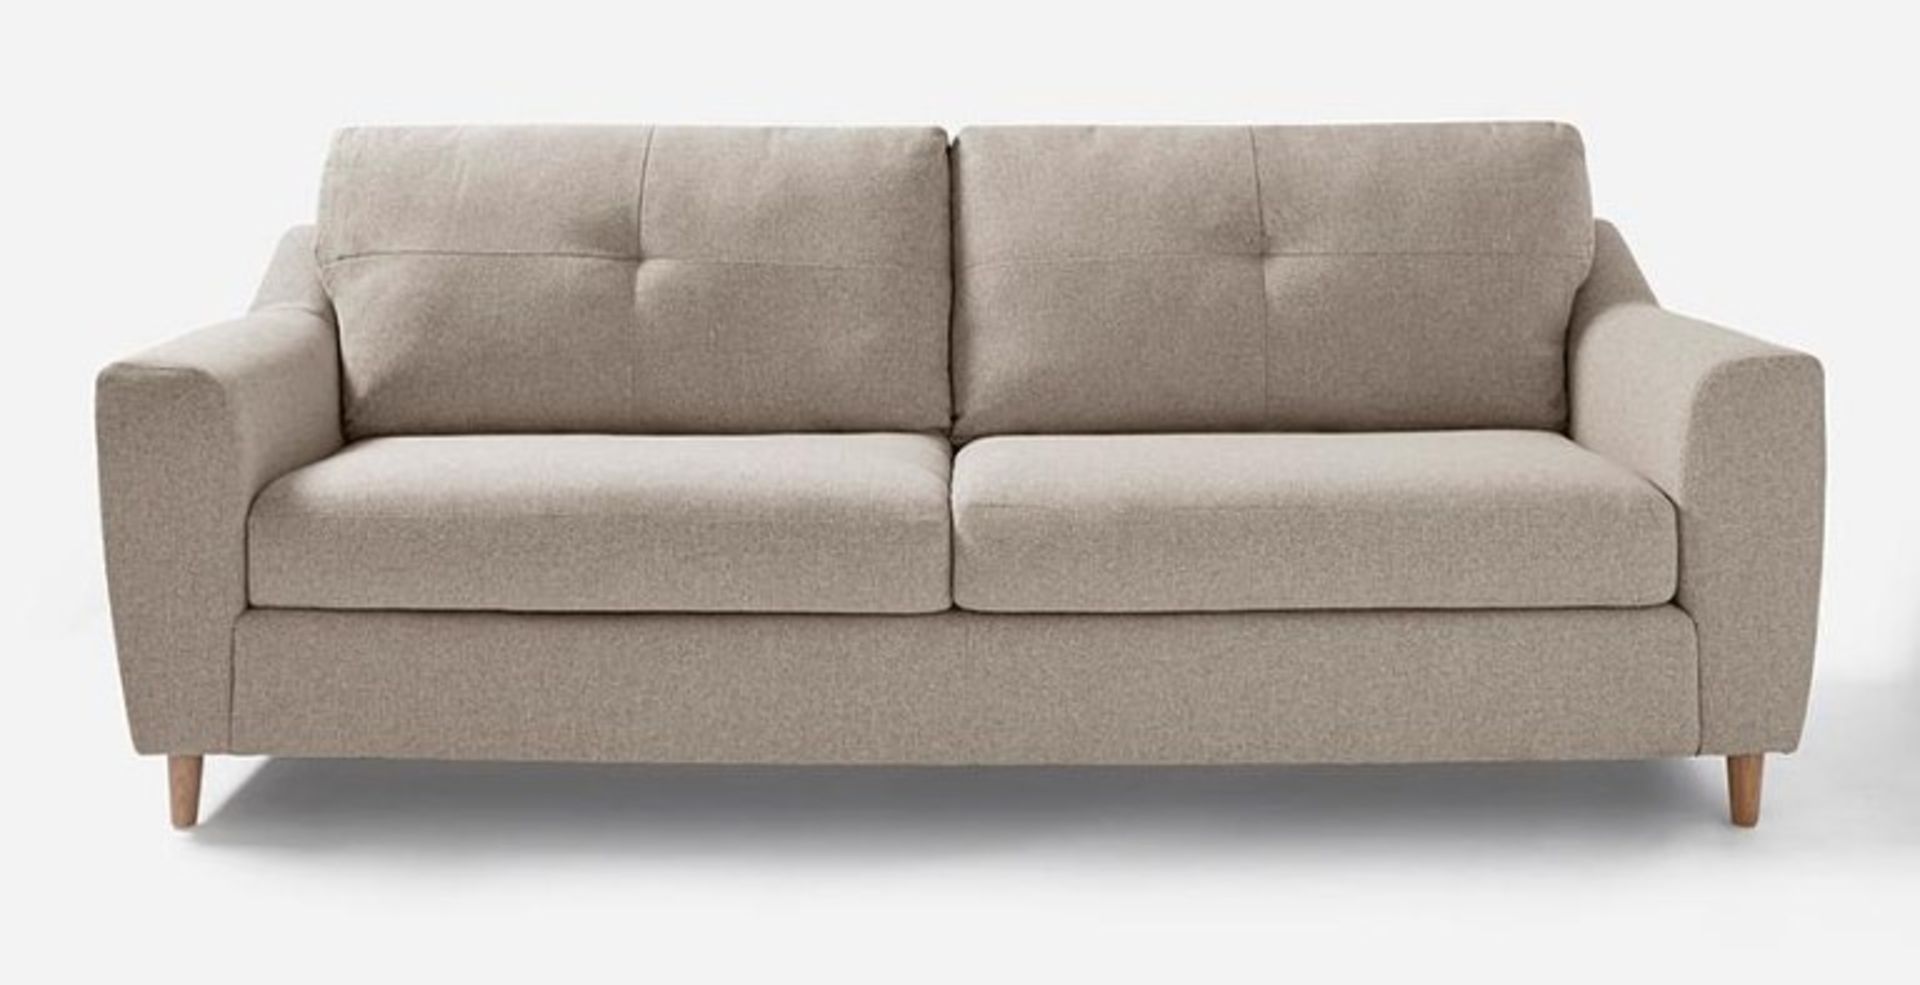 Baxter 4 Seater Sofa. - ER23. RRP £749.00. The contemporary style of the Baxter range is both on-